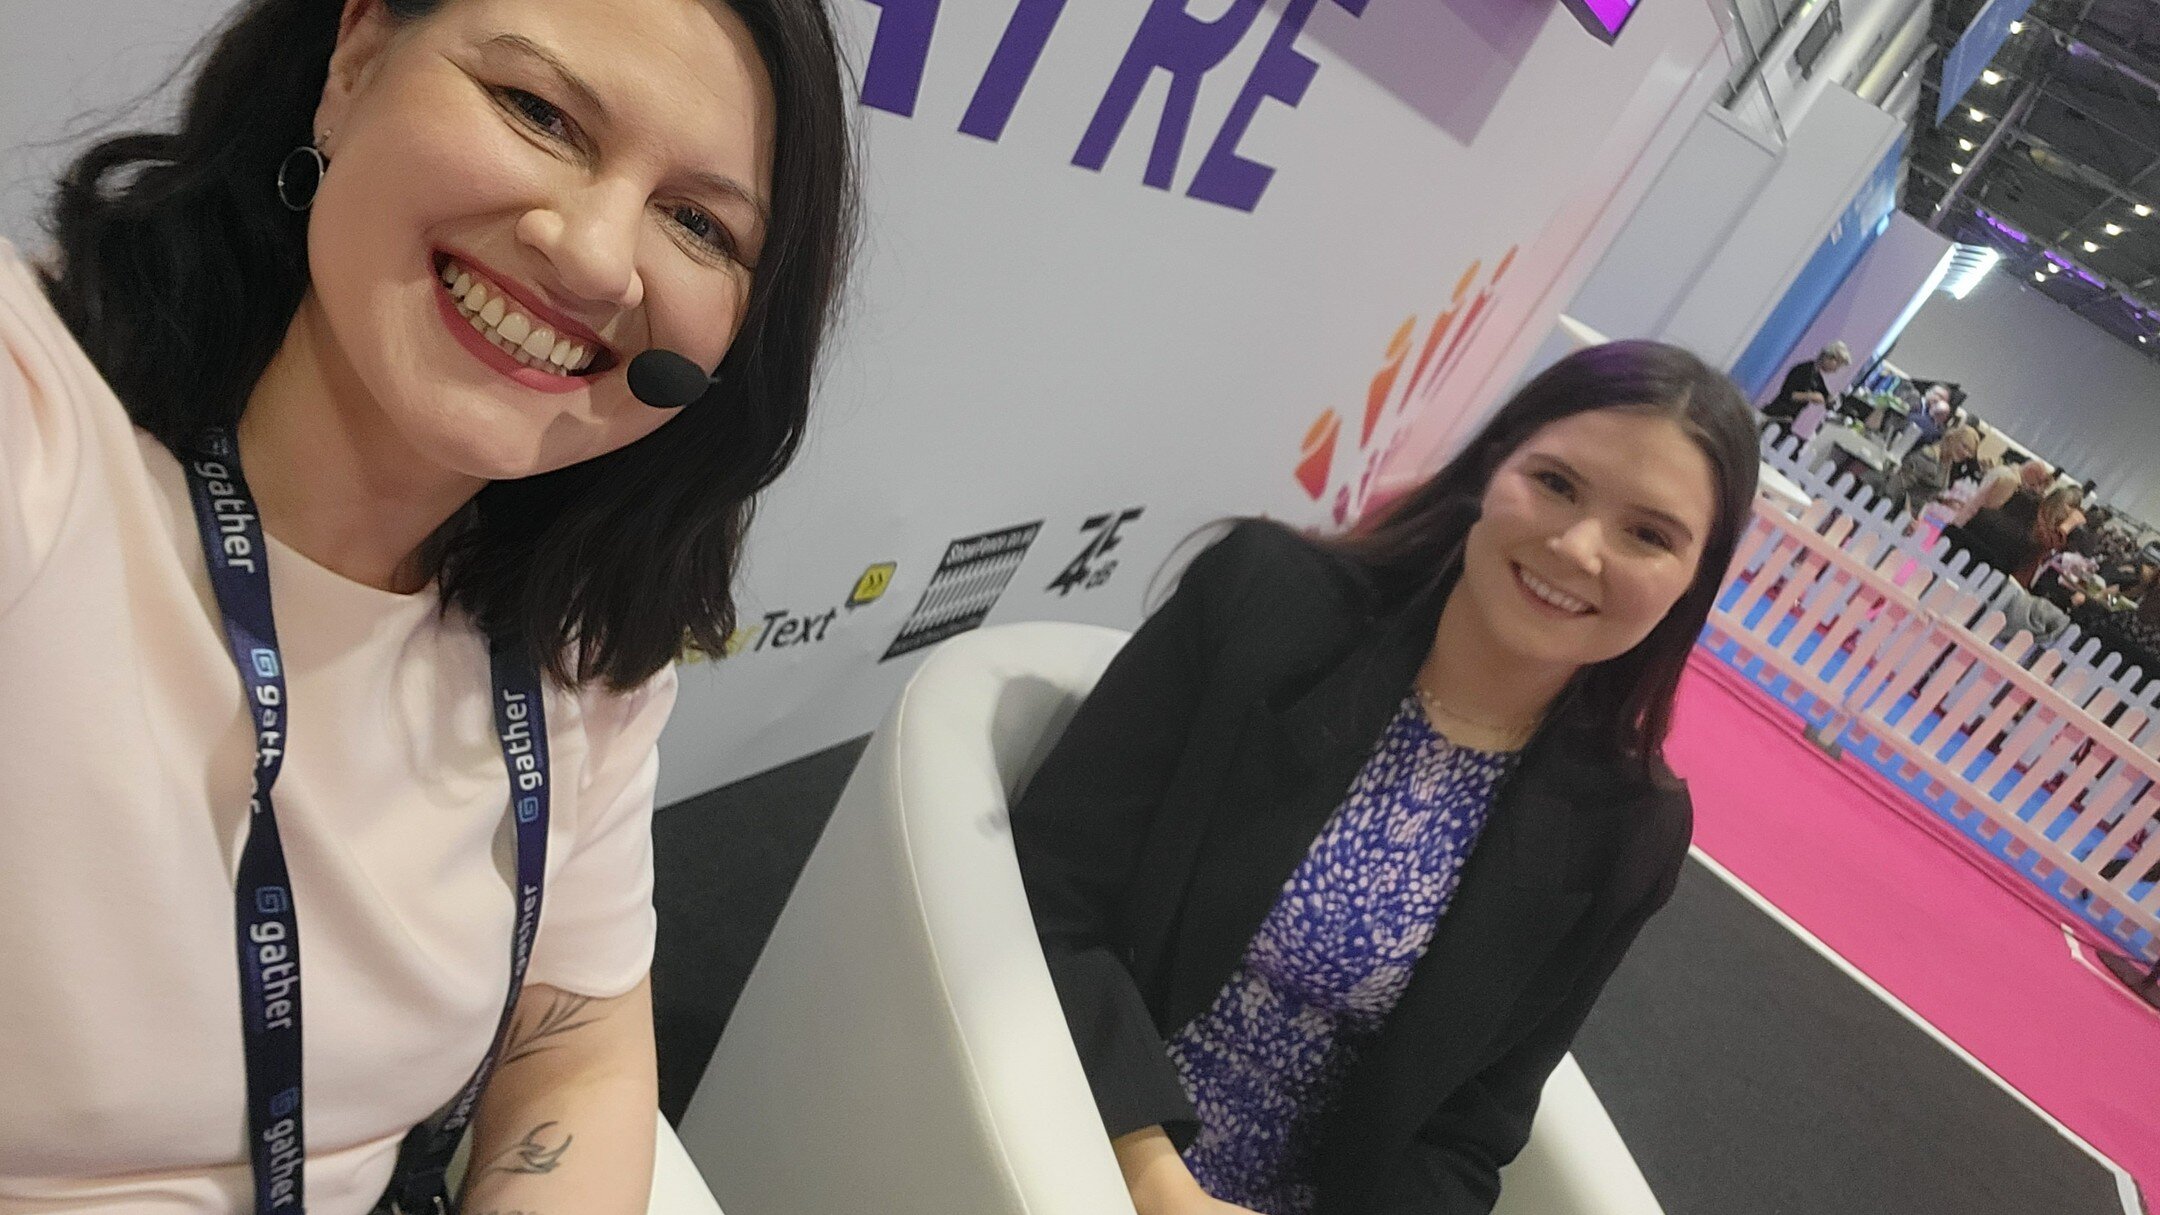 Another highlight and goal ticked off last week @internationalconfex Confex!

I spoke on a panel with my fellow @fastforward15uk mentees on The @_thepowerofevents stage. 
If I'm honest, I was terrified and extremely nervous. I am not a natural public